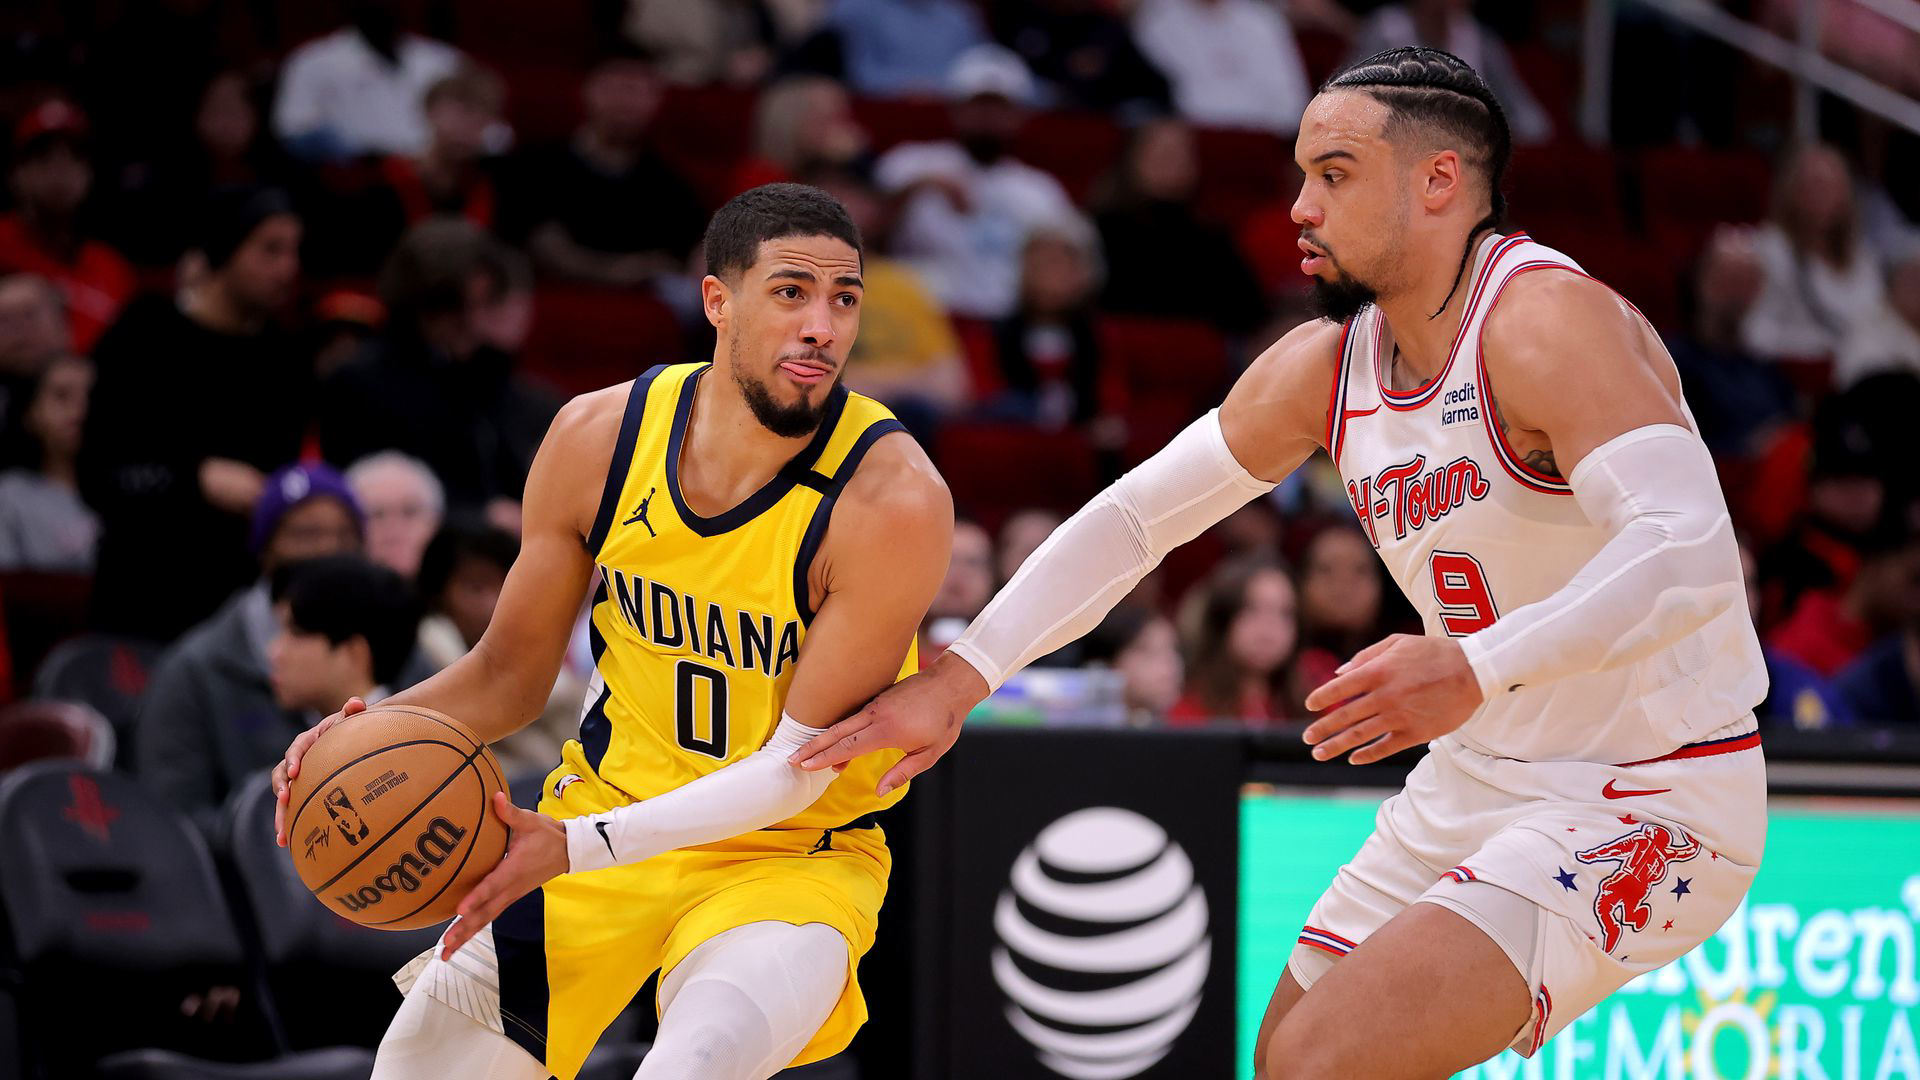 Houston Rockets vs. Indiana Pacers game preview